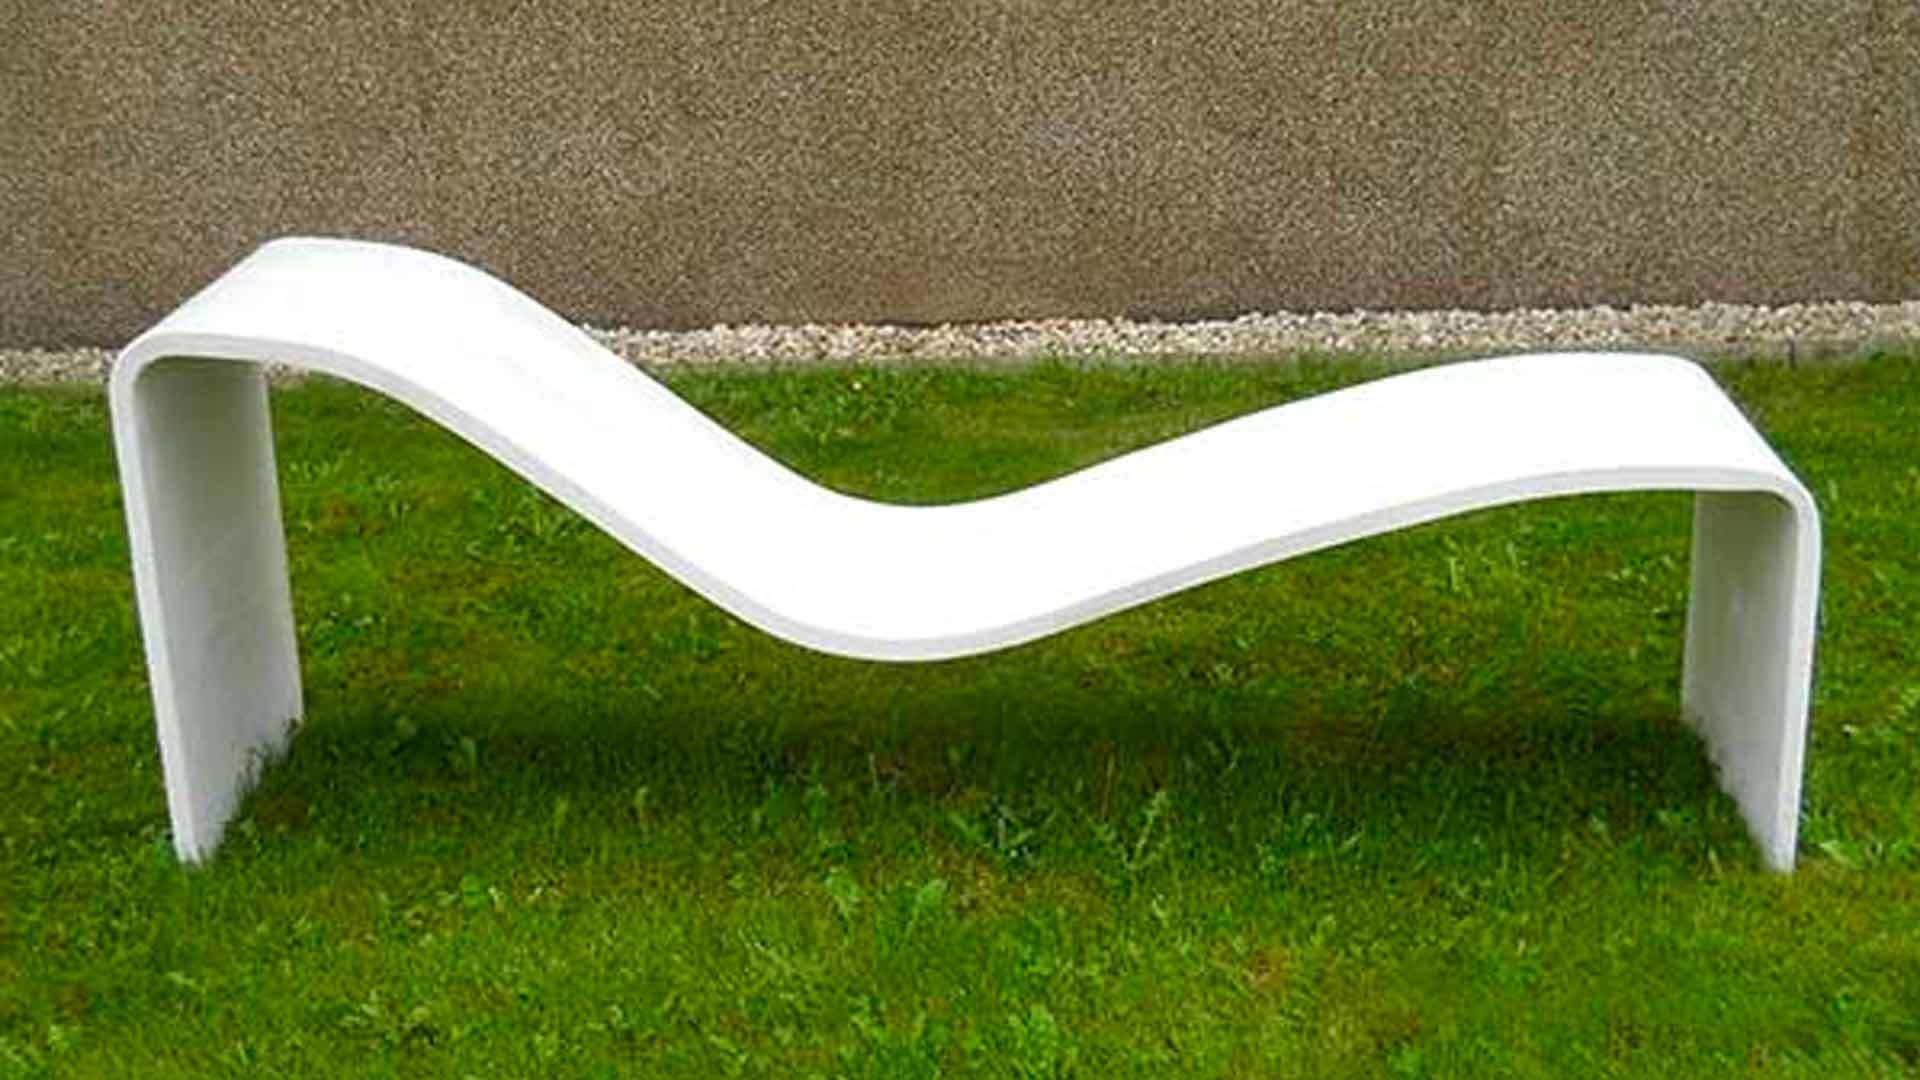 DUCON Lounger: Formability